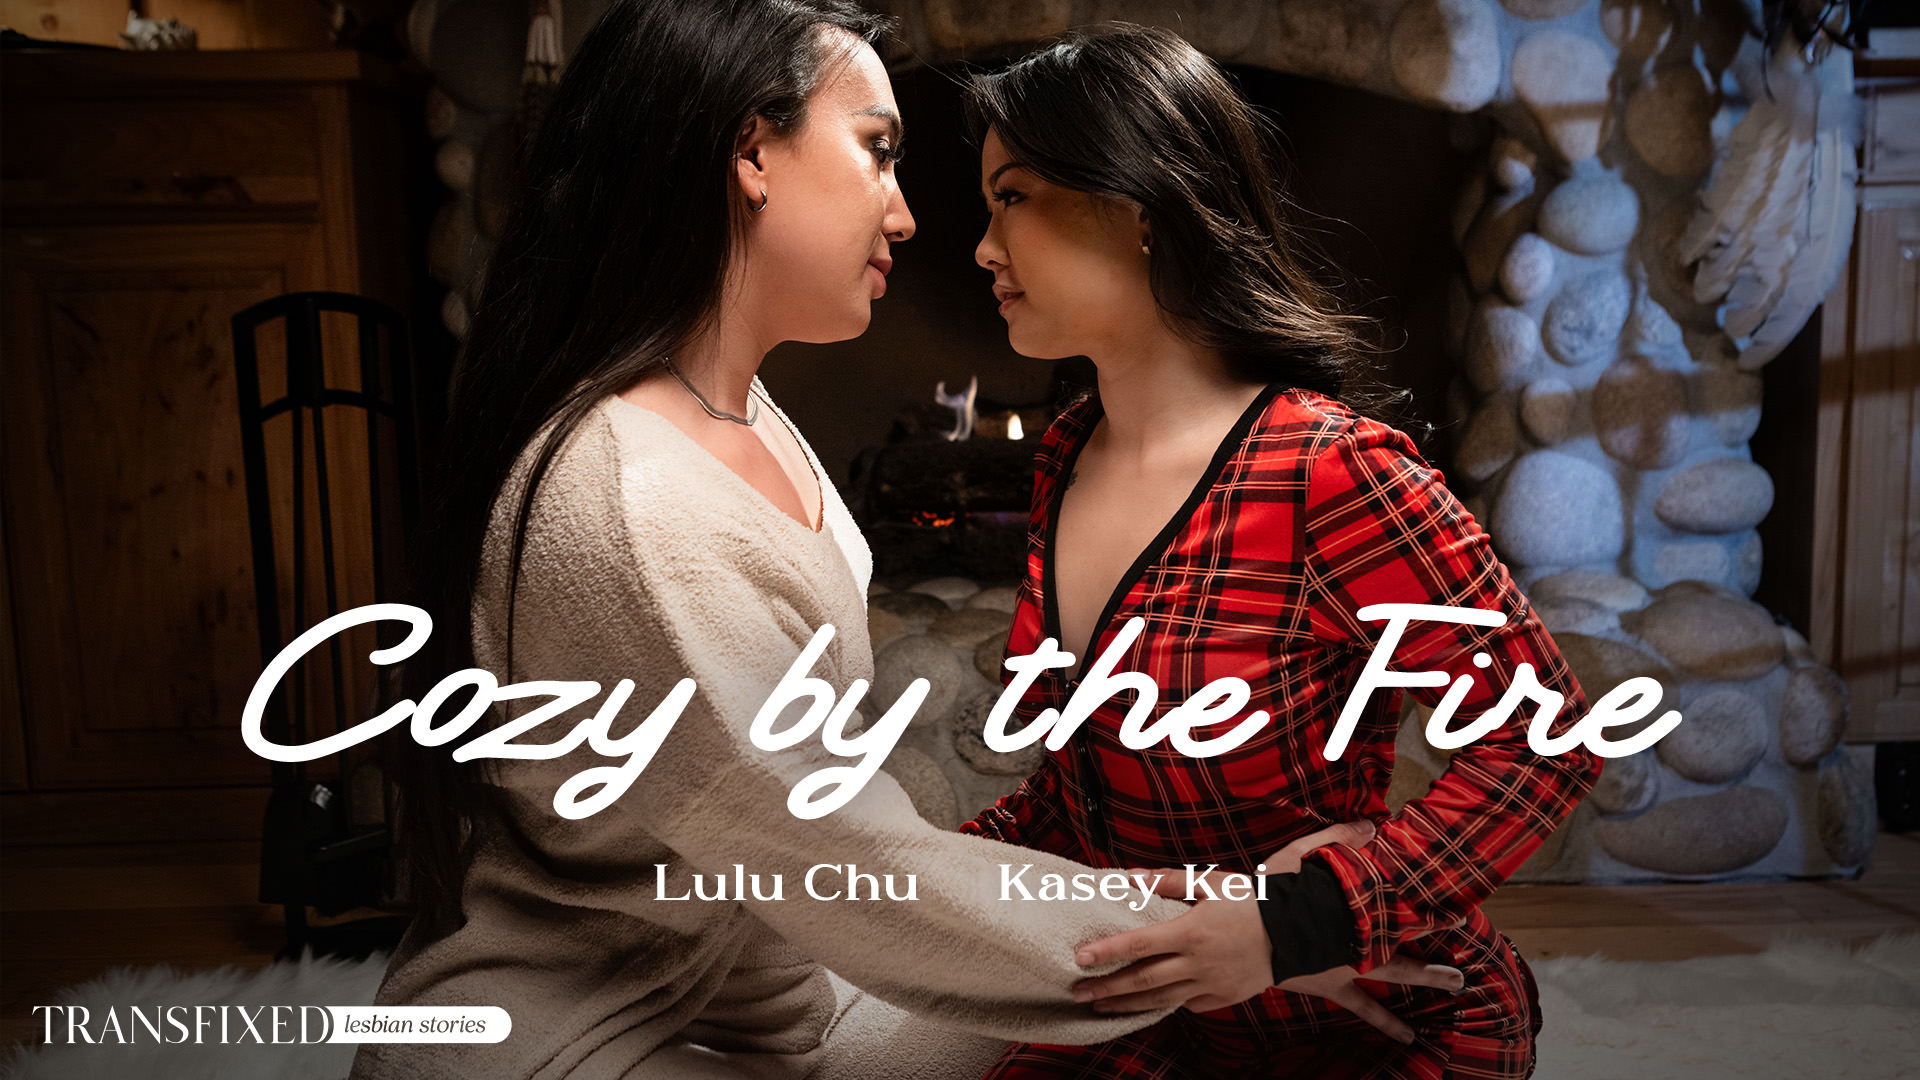 Cozy by the Fire with Lulu Chu, Kasey Kei in Transfixed by Adult Time